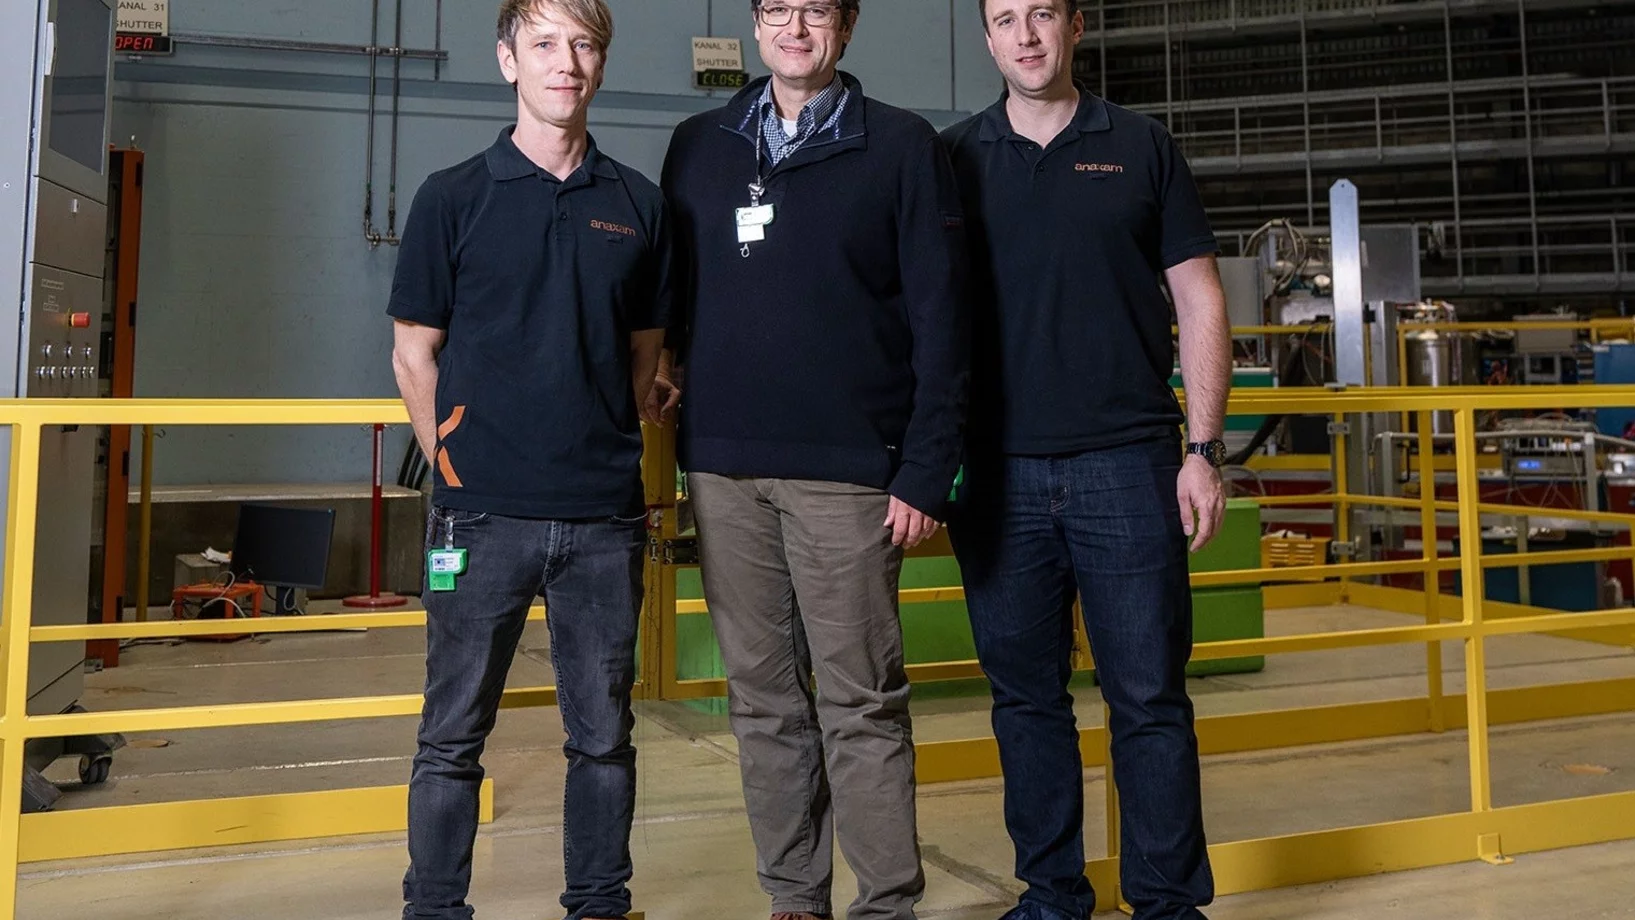 Phillippe Würsch (left) and Matthias Wagner (right) from ANAXAM appreciate the good and close cooperation with David Mannes from PSI, which was also successful in the case of the brake piston investigations. (Photo: Paul Scherrer Institute/Mahir Dzambegovic)